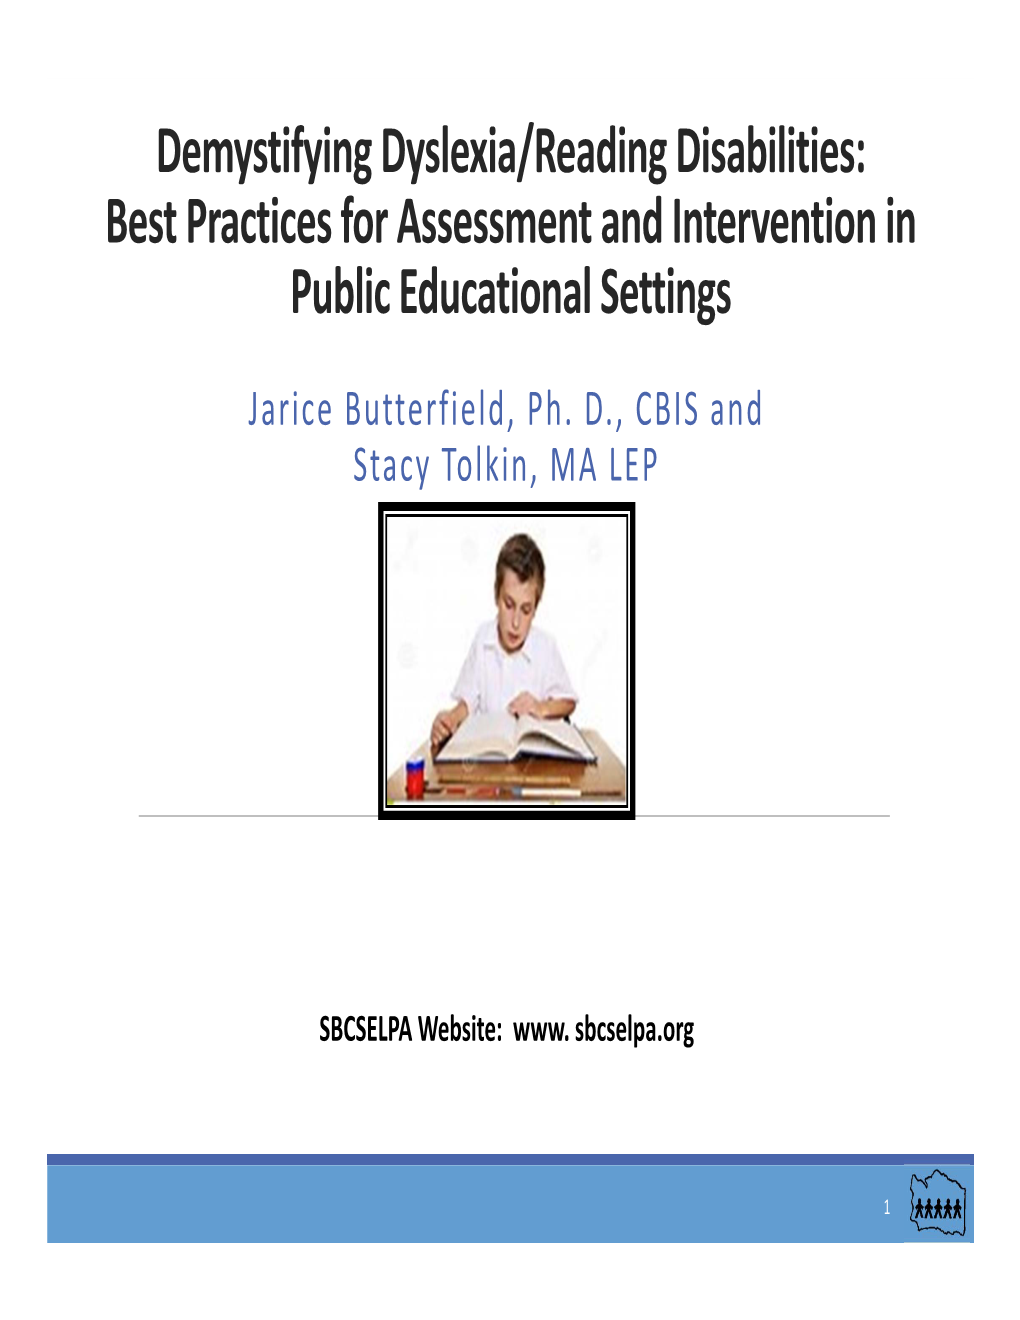 Demystifying Dyslexia/Reading Disabilities: Best Practices for Assessment and Intervention in Public Educational Settings